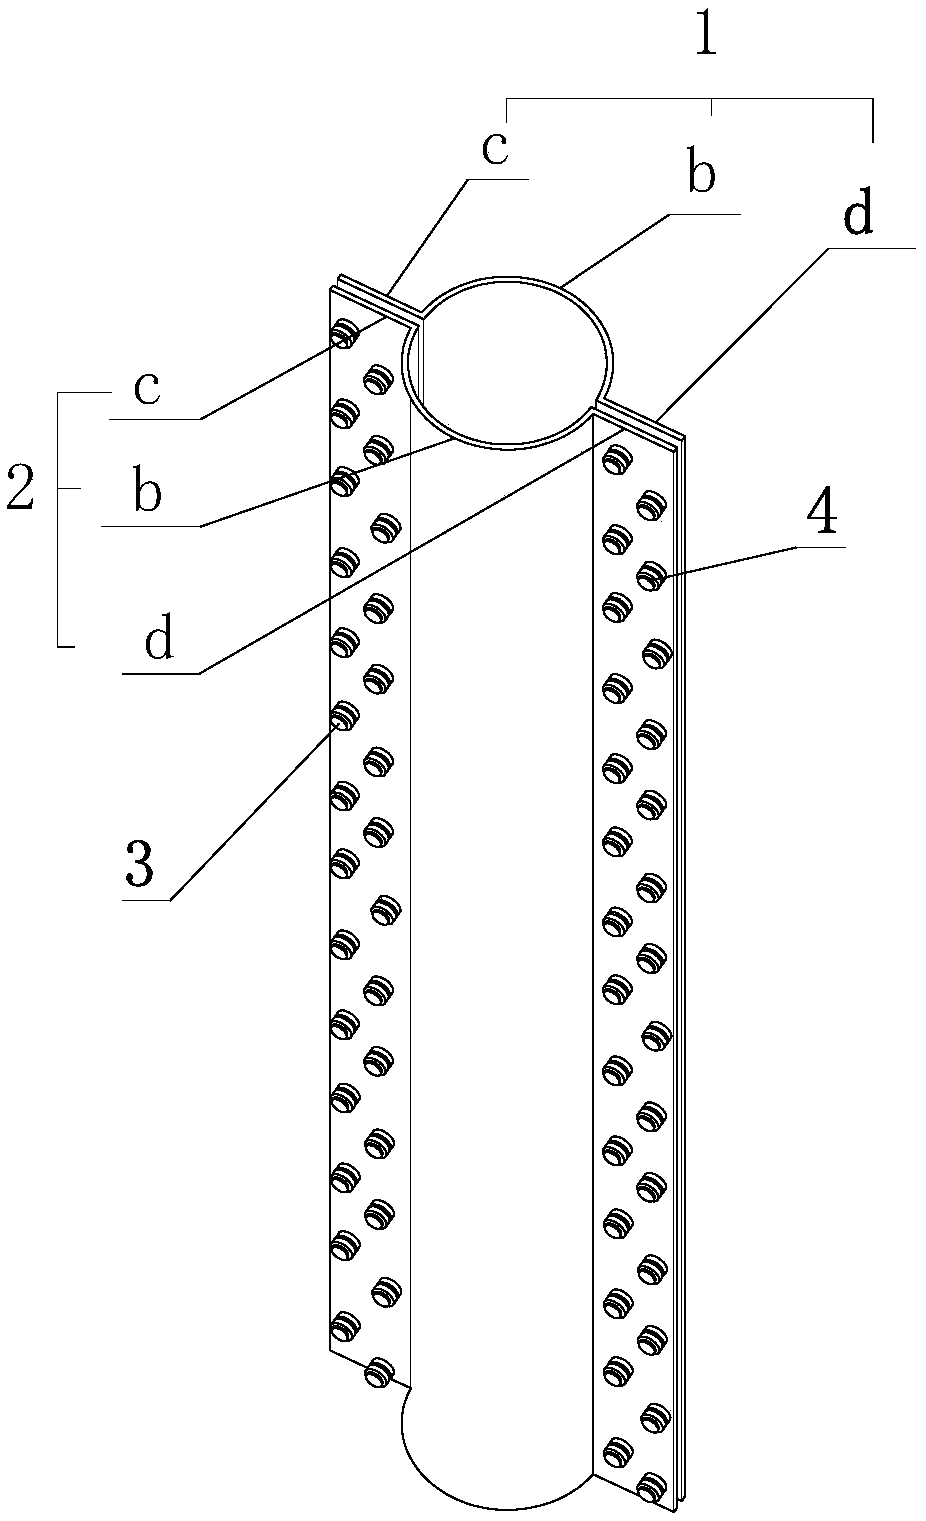 Reinforcing device for reinforcing steel member in communication tower